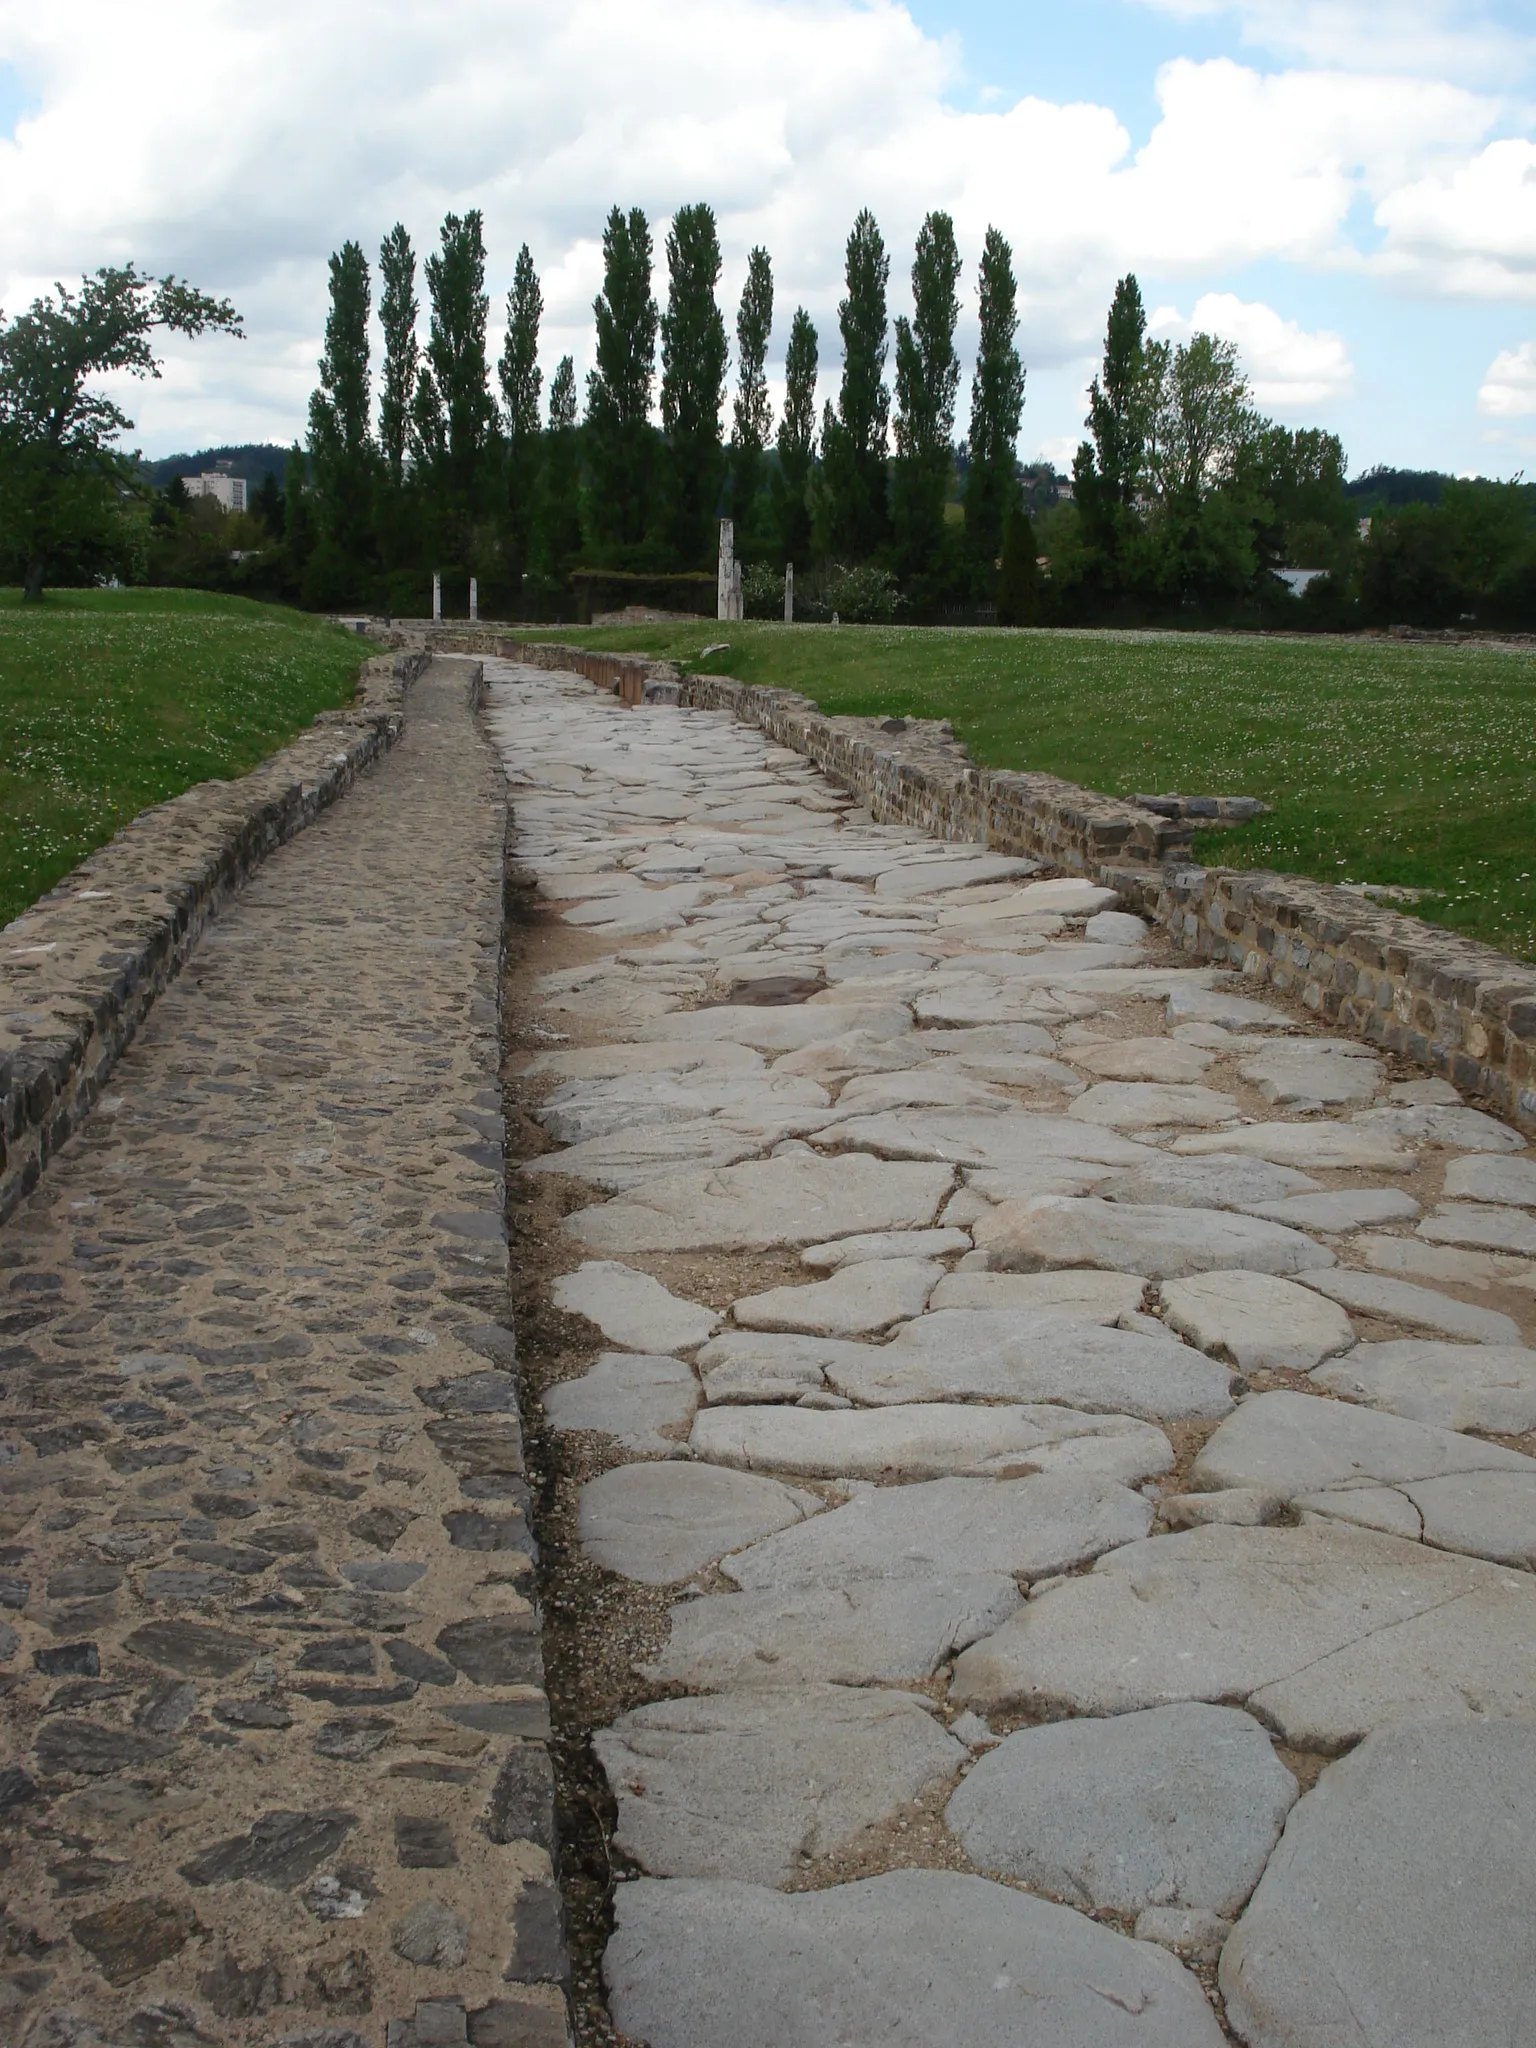 Photo showing: Granite pathway at Saint-Romain-en-Gal, Rhône département, left bank (west side) of the Rhone river. Vienne is on the right bank (east side) of the Rhone river, in the departement of Isère.